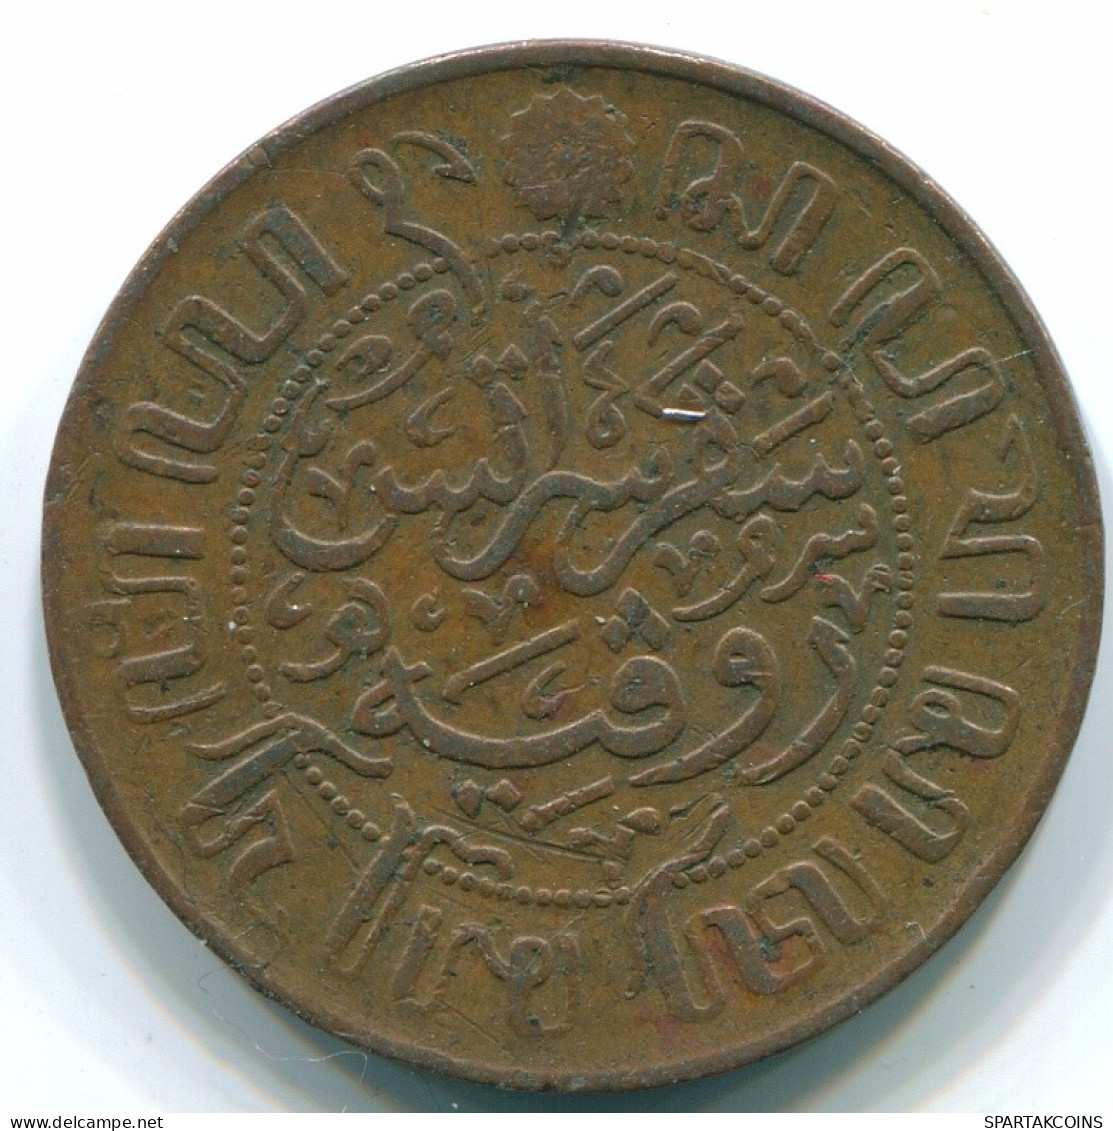 1 CENT 1929 NETHERLANDS EAST INDIES INDONESIA Copper Colonial Coin #S10103.U.A - Indie Olandesi